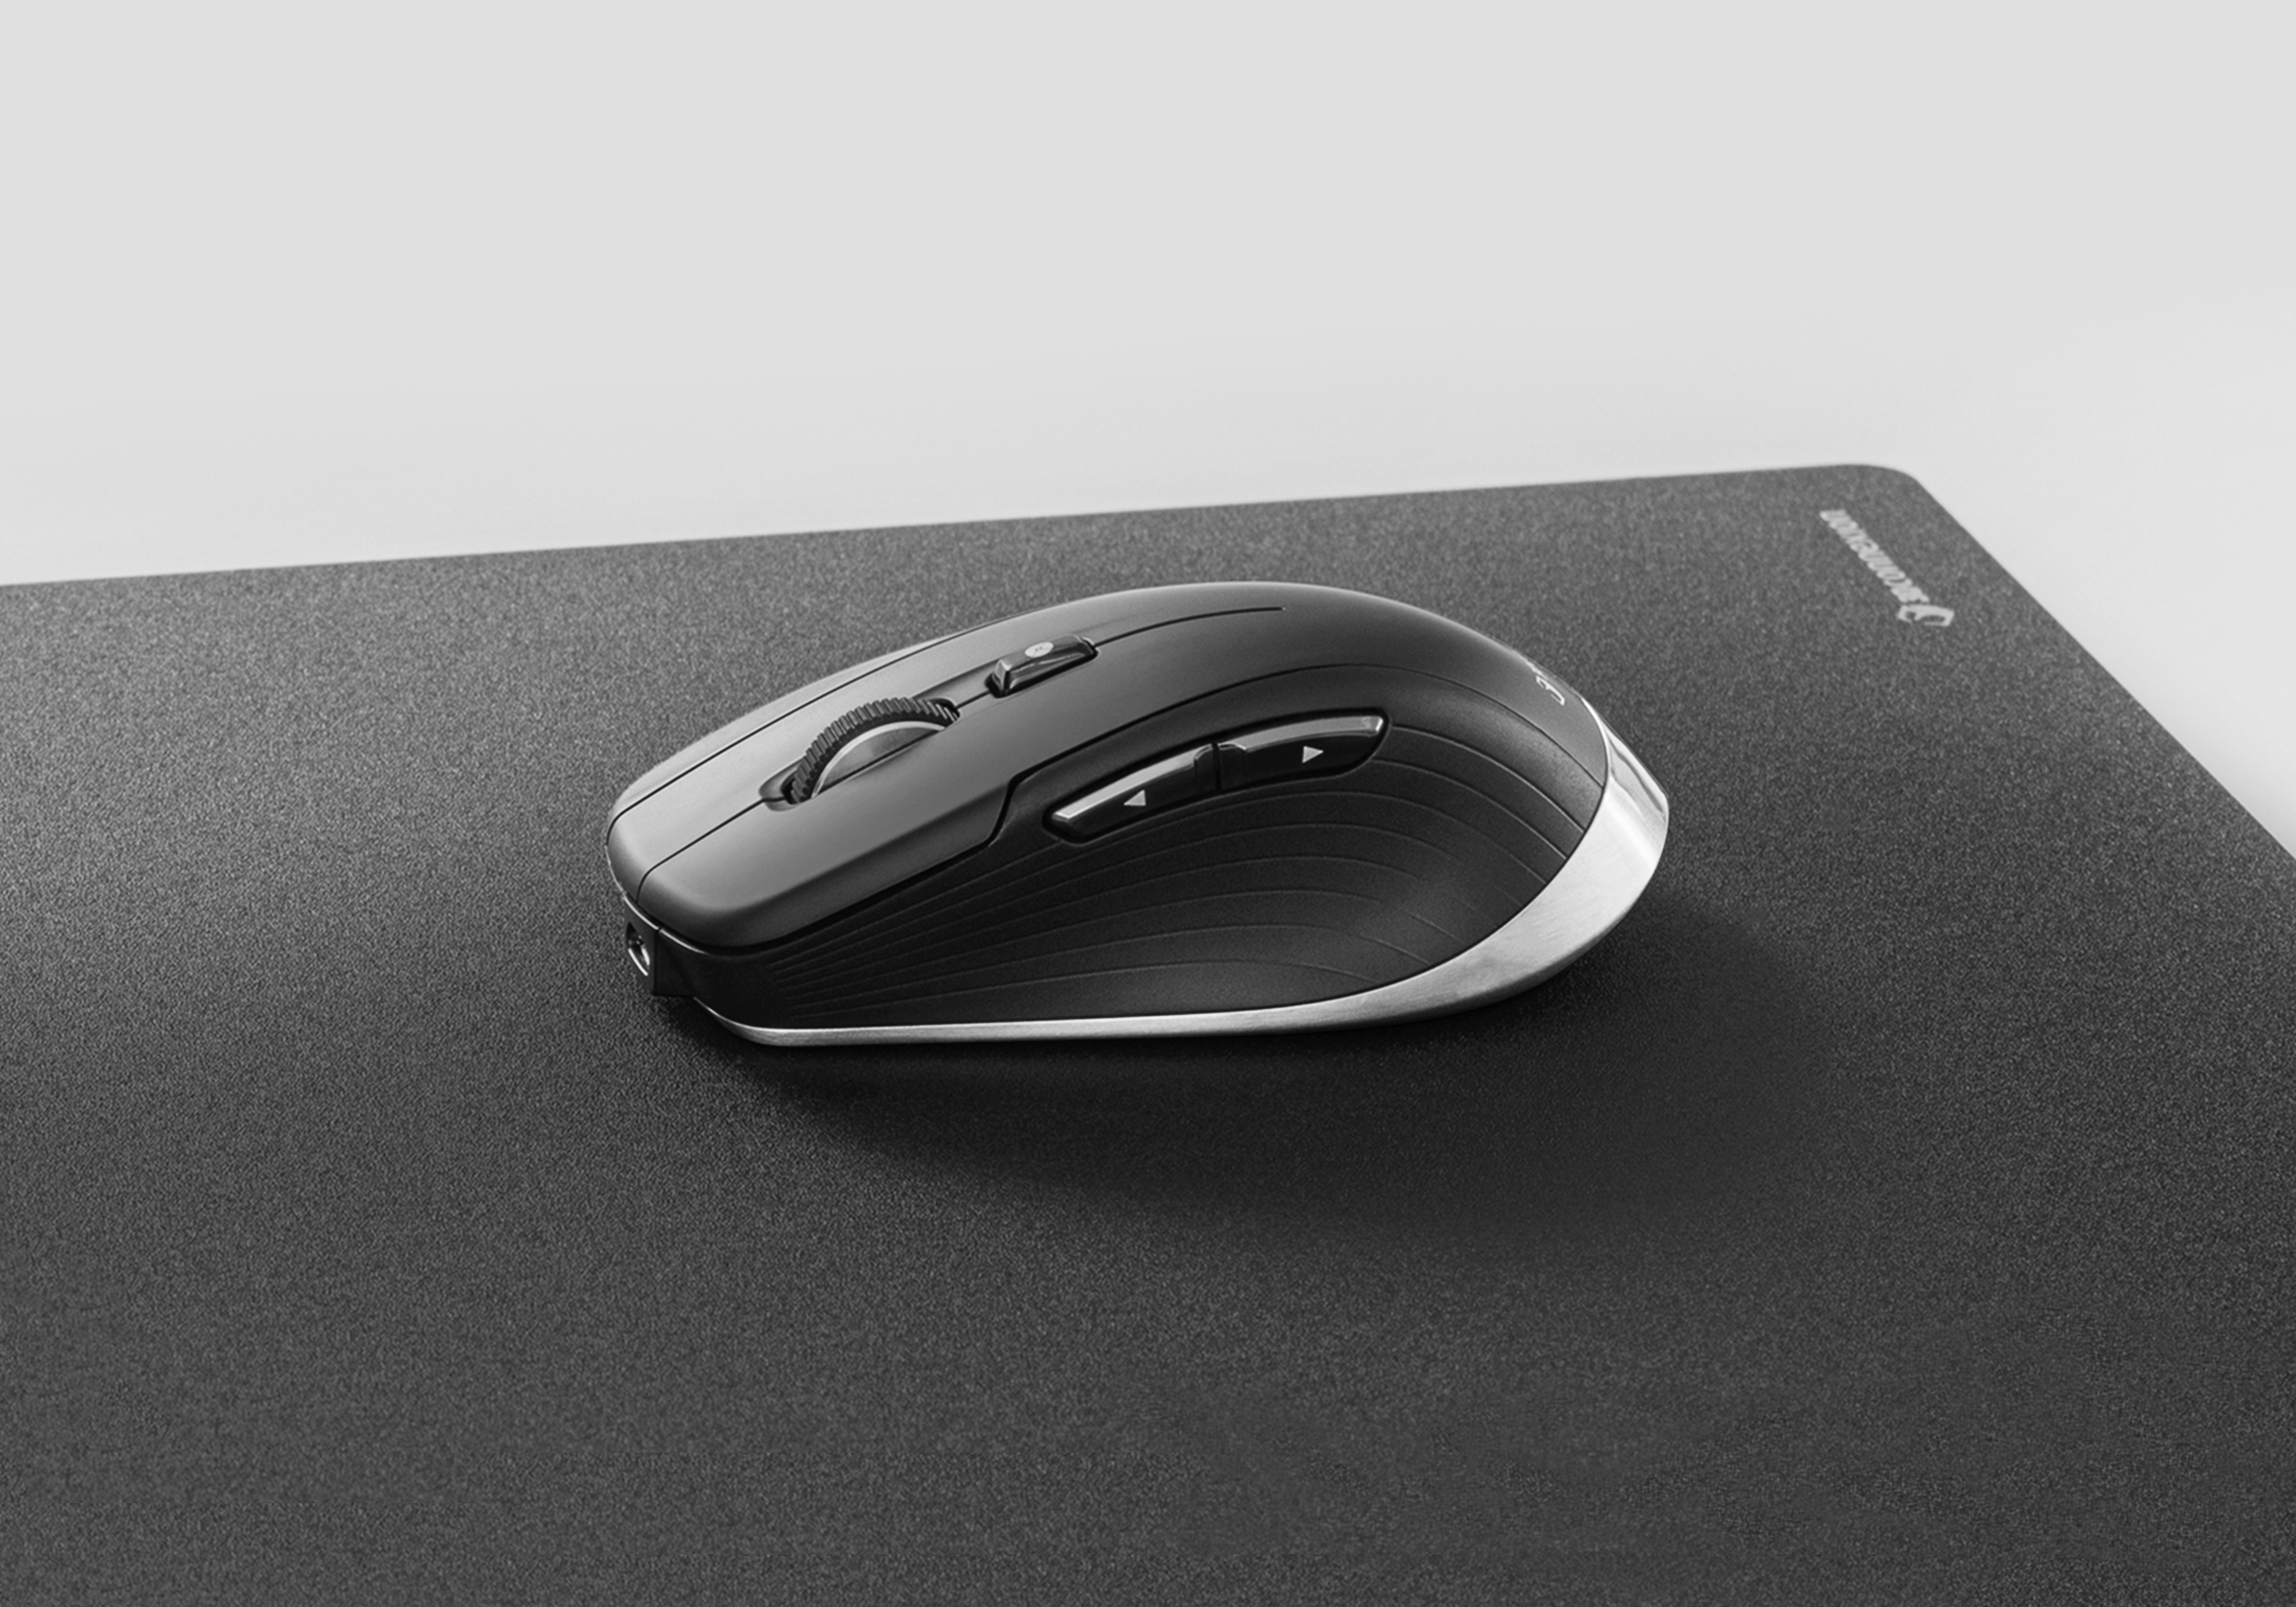 3Dconnexion CadMouse Wireless on a mouse pad